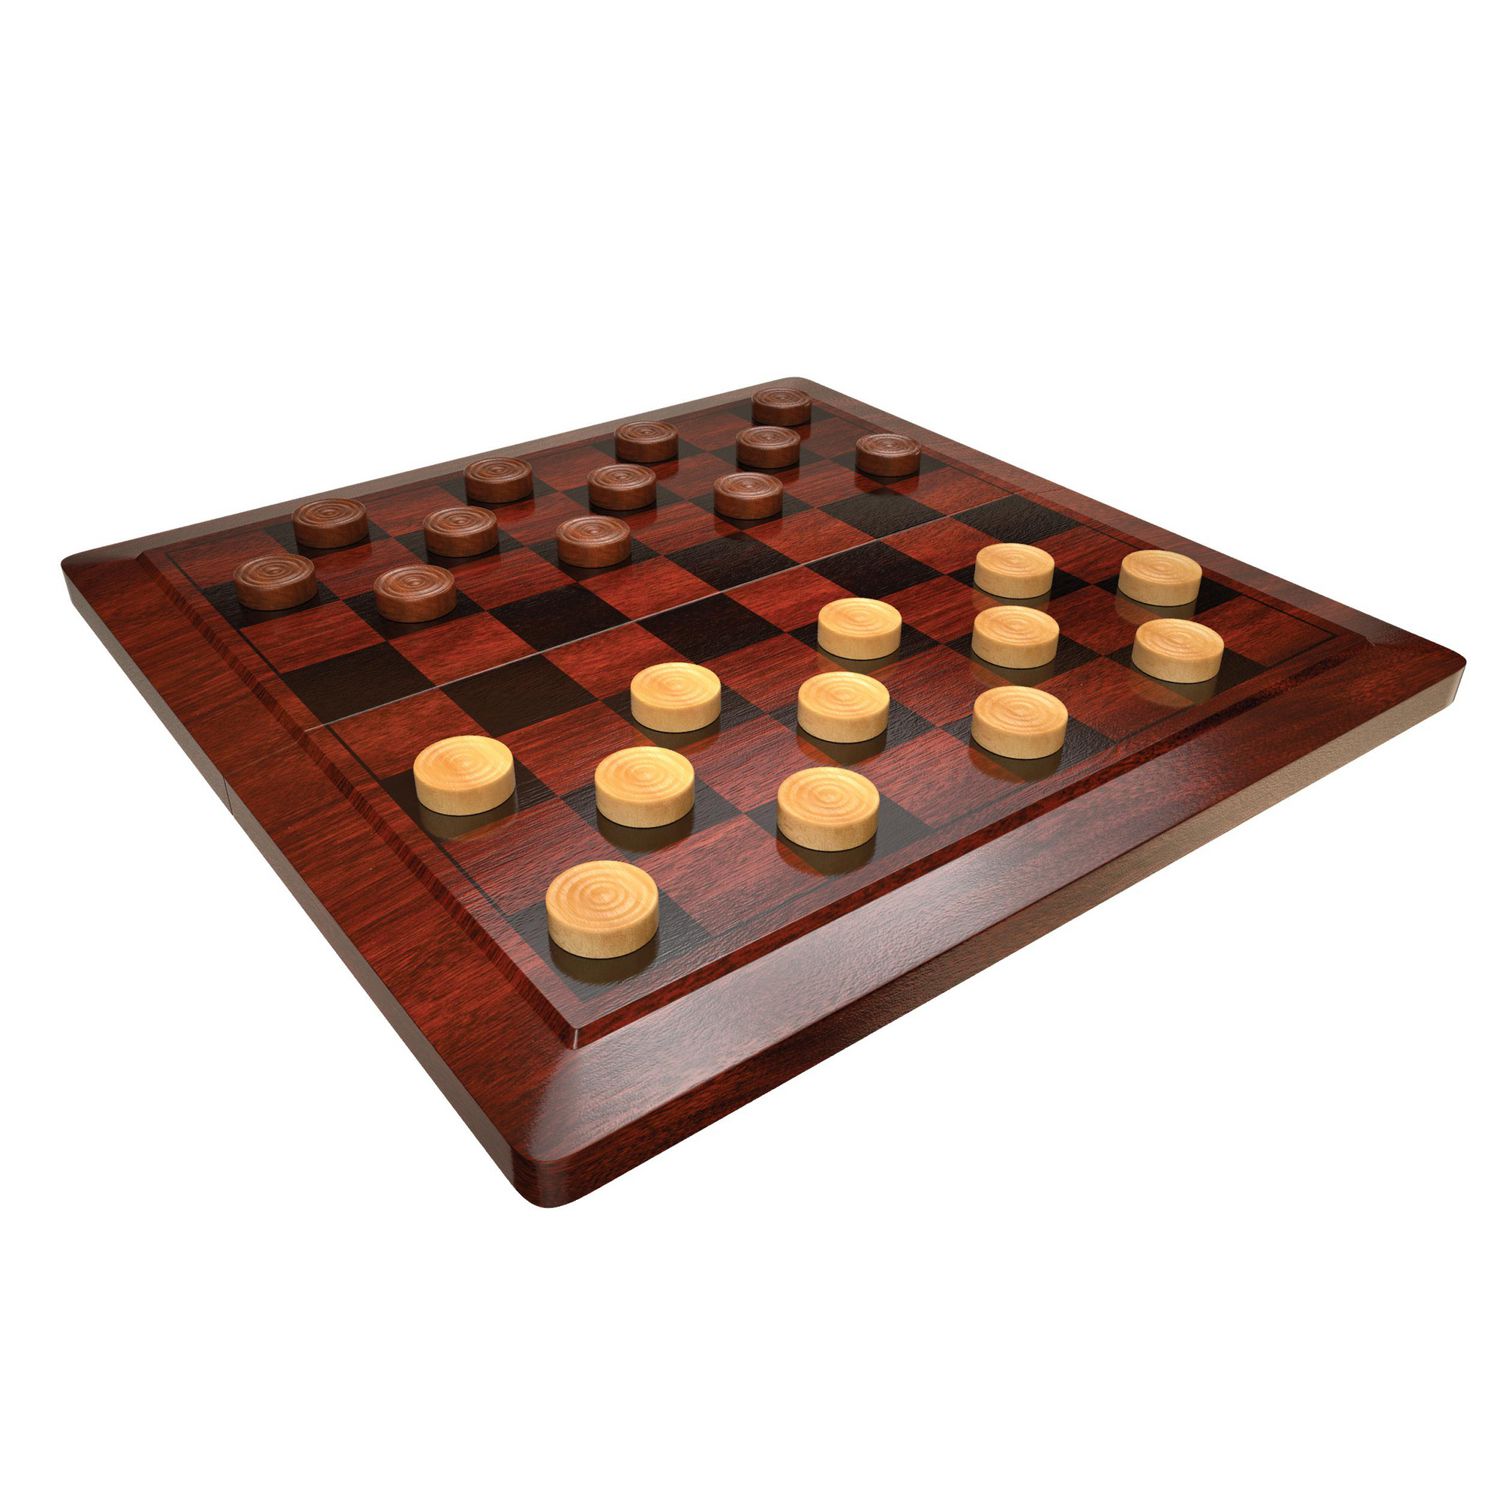 Cardinal Games Chess Checkers Backgammon Set with Wooden Storage